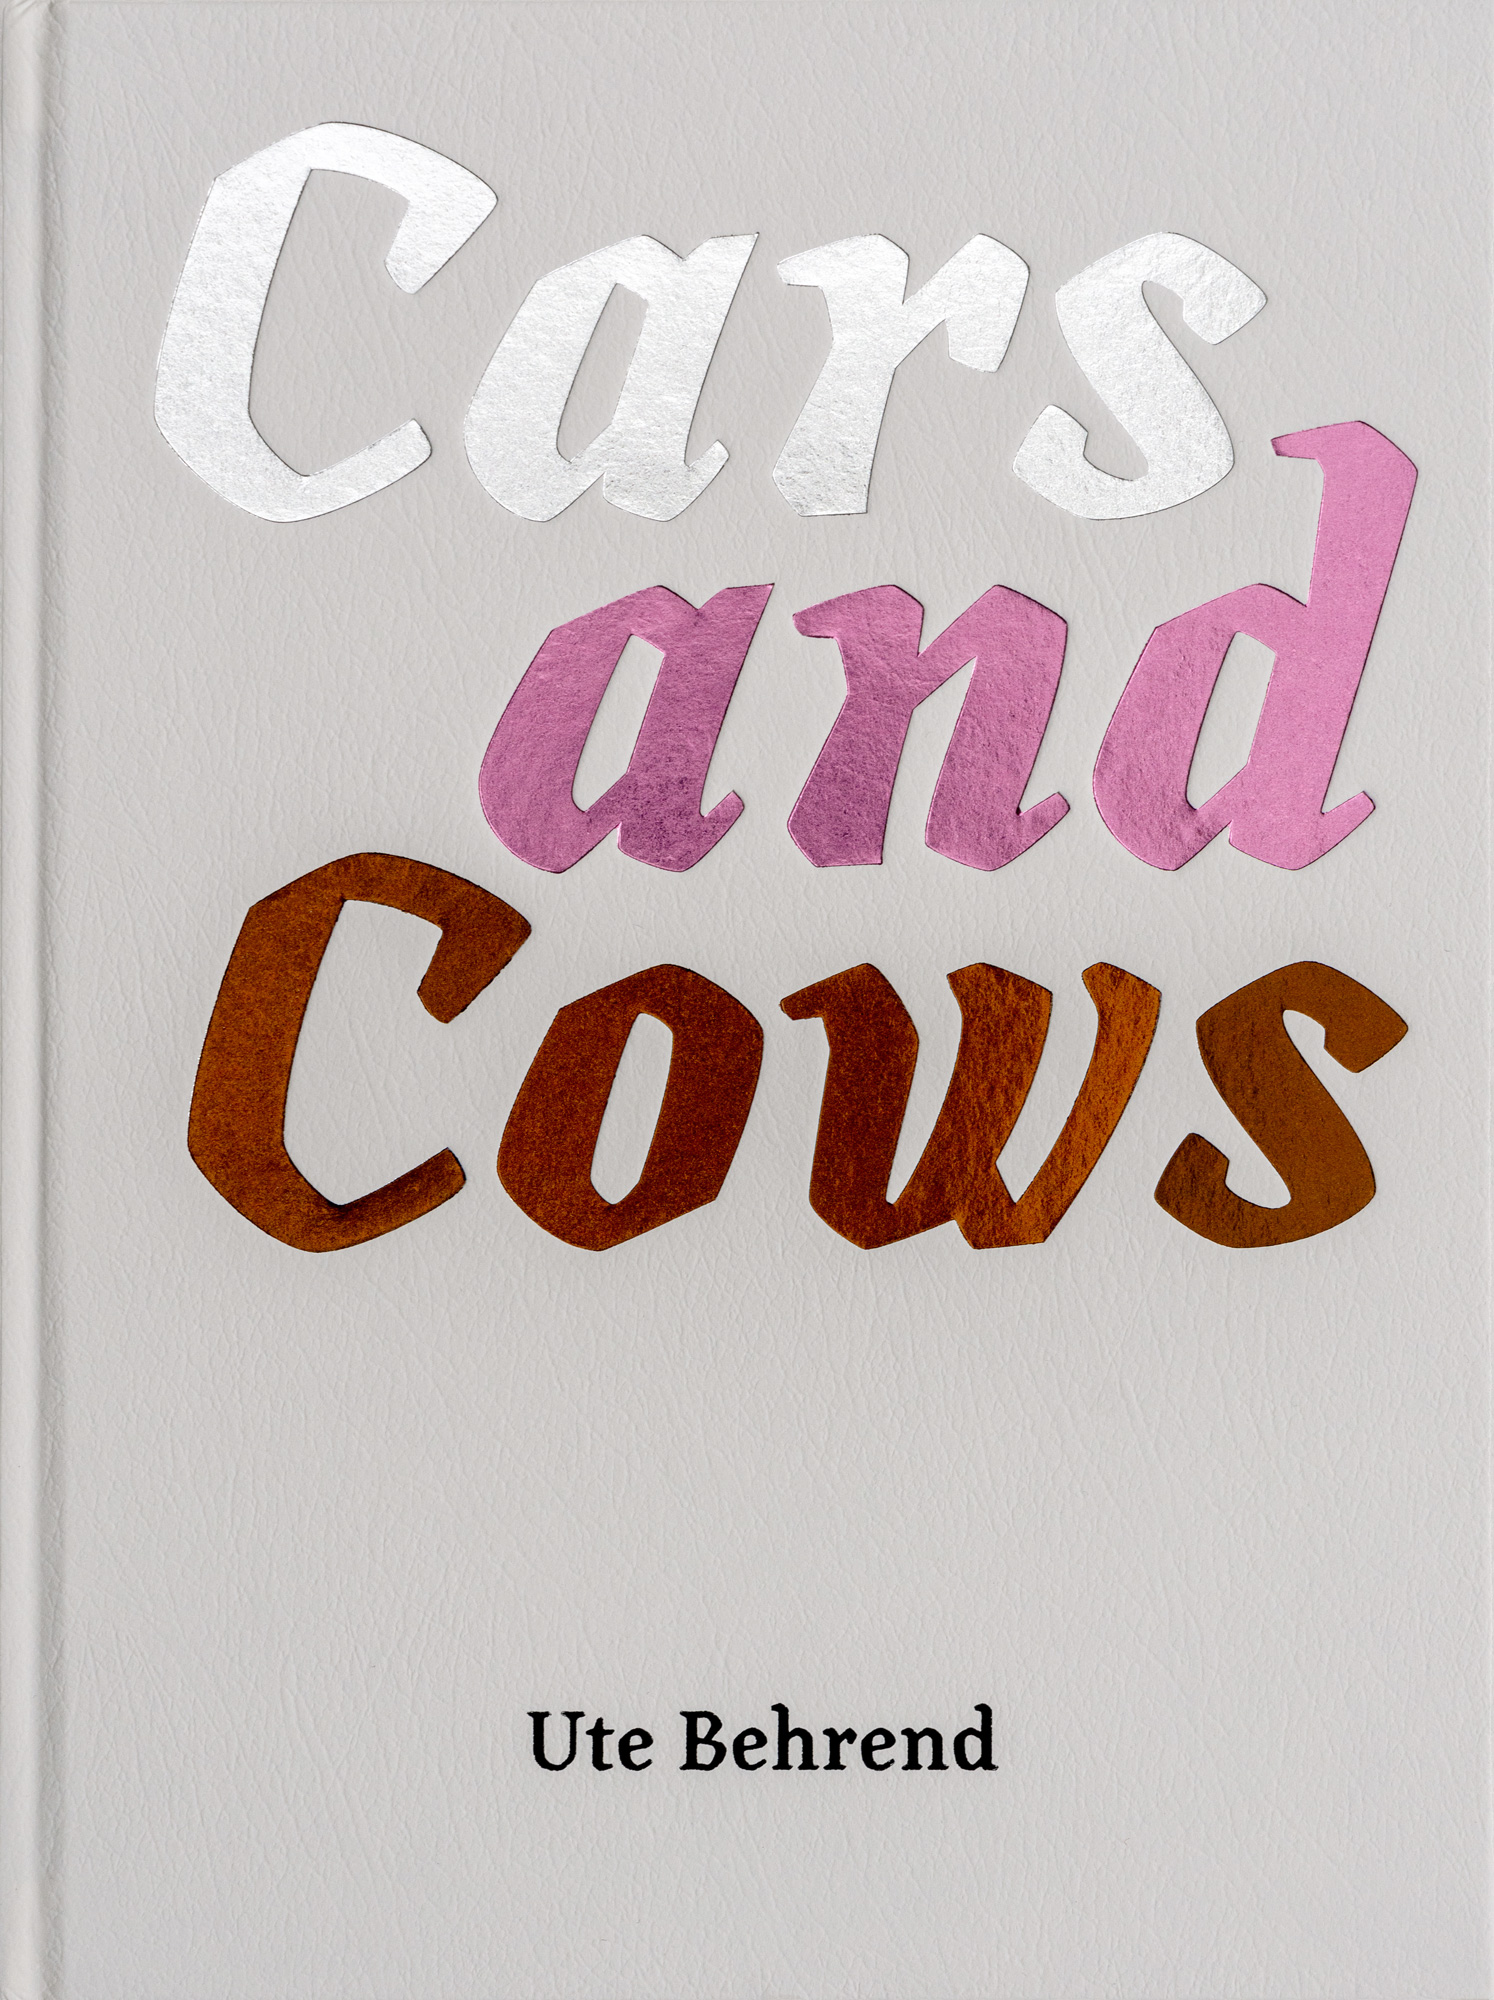 Cars and Cows